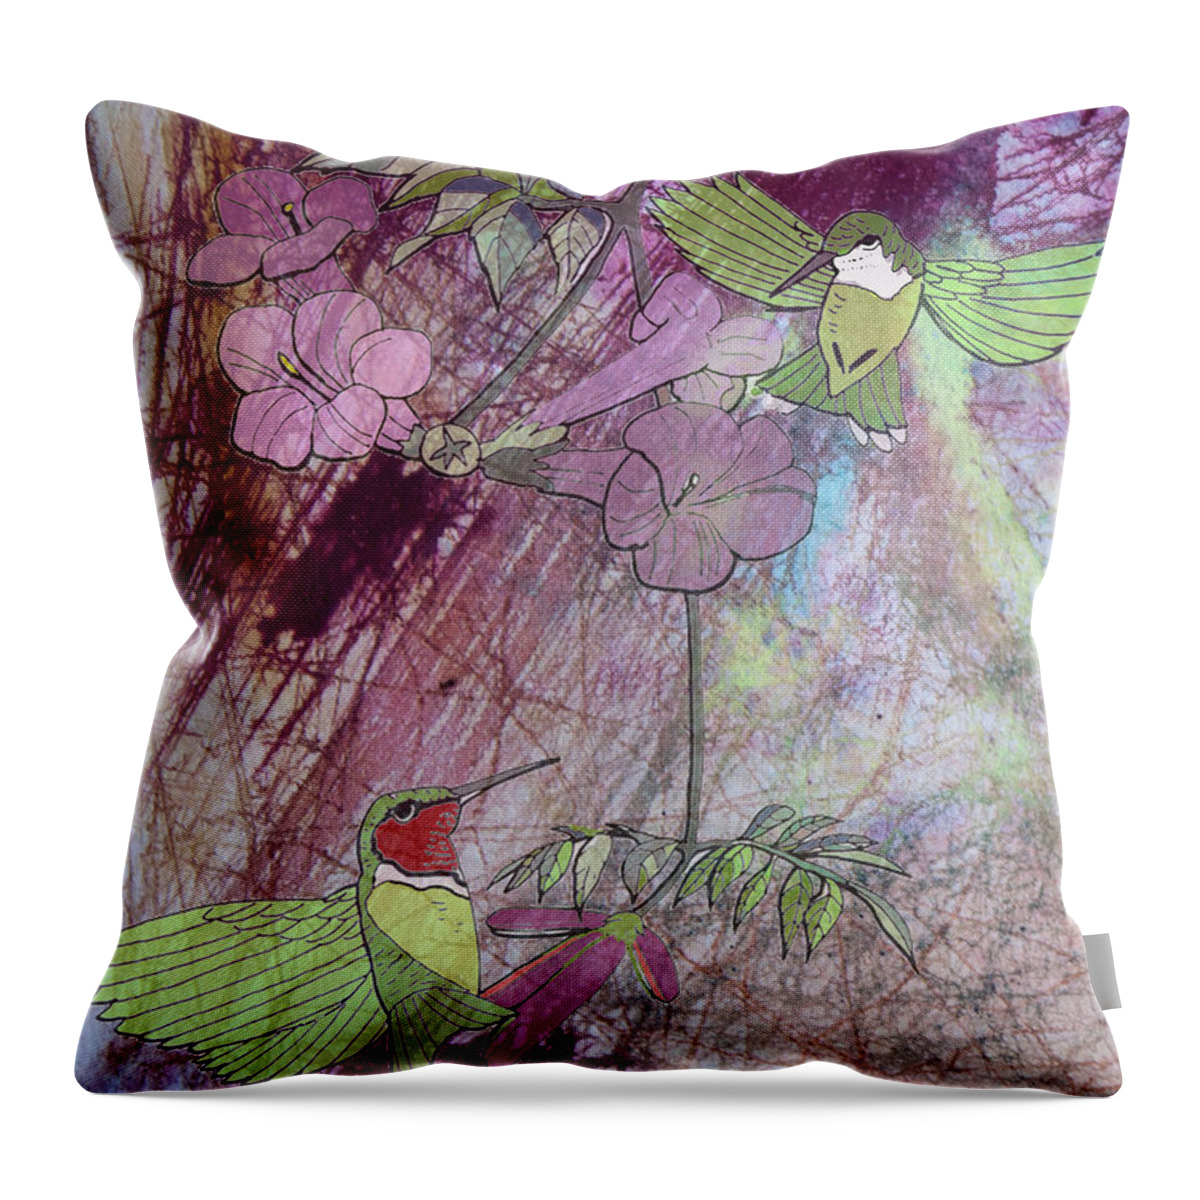 Mixed Media Throw Pillow featuring the mixed media Humming Bird by Donna Walsh